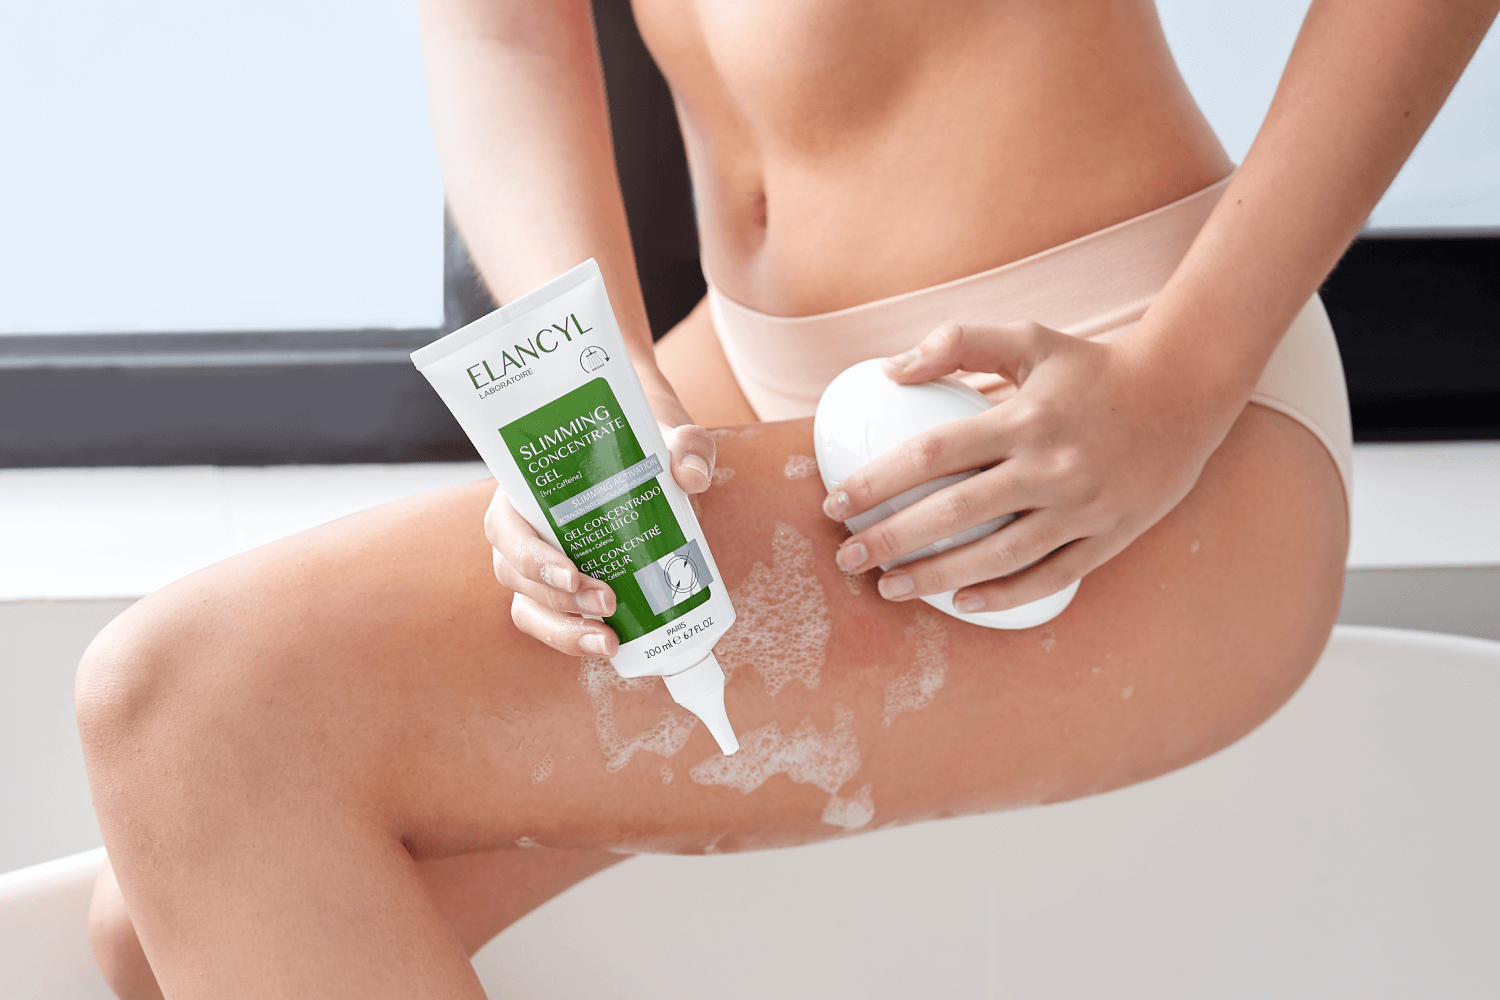 How to Use Elancyl to Reduce Cellulite at Home